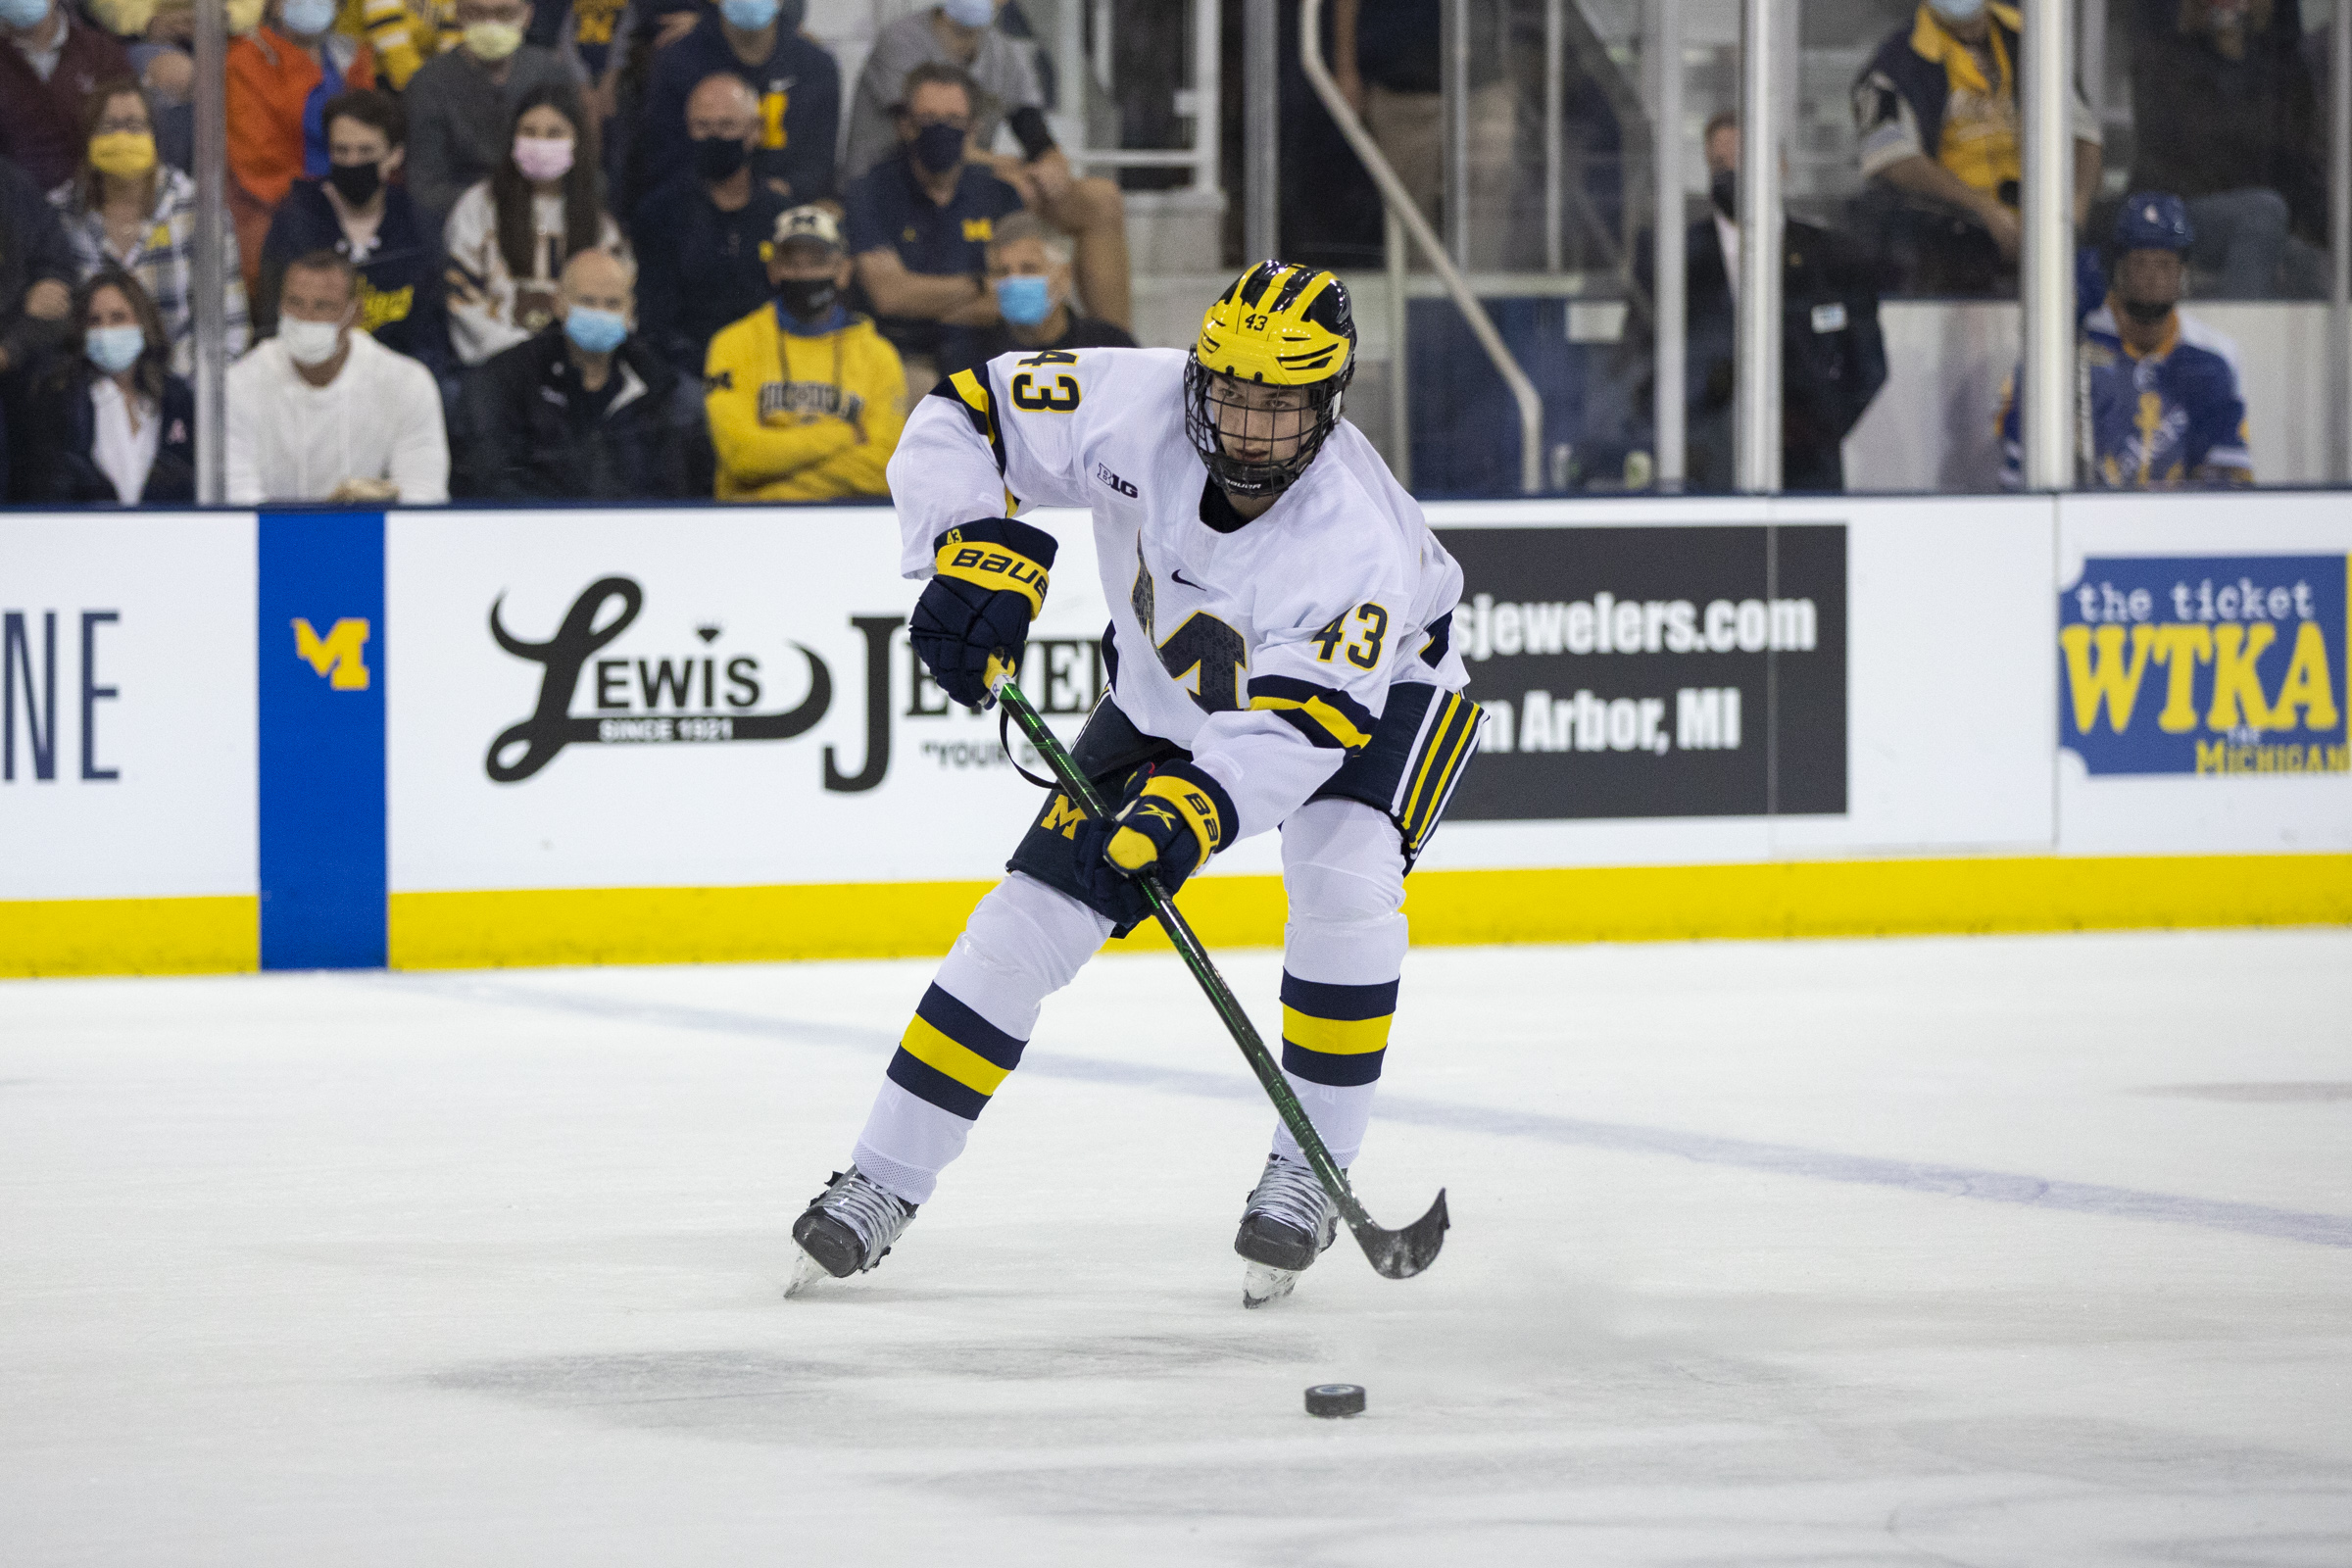 Three thoughts on Michigan hockeys World Junior connections